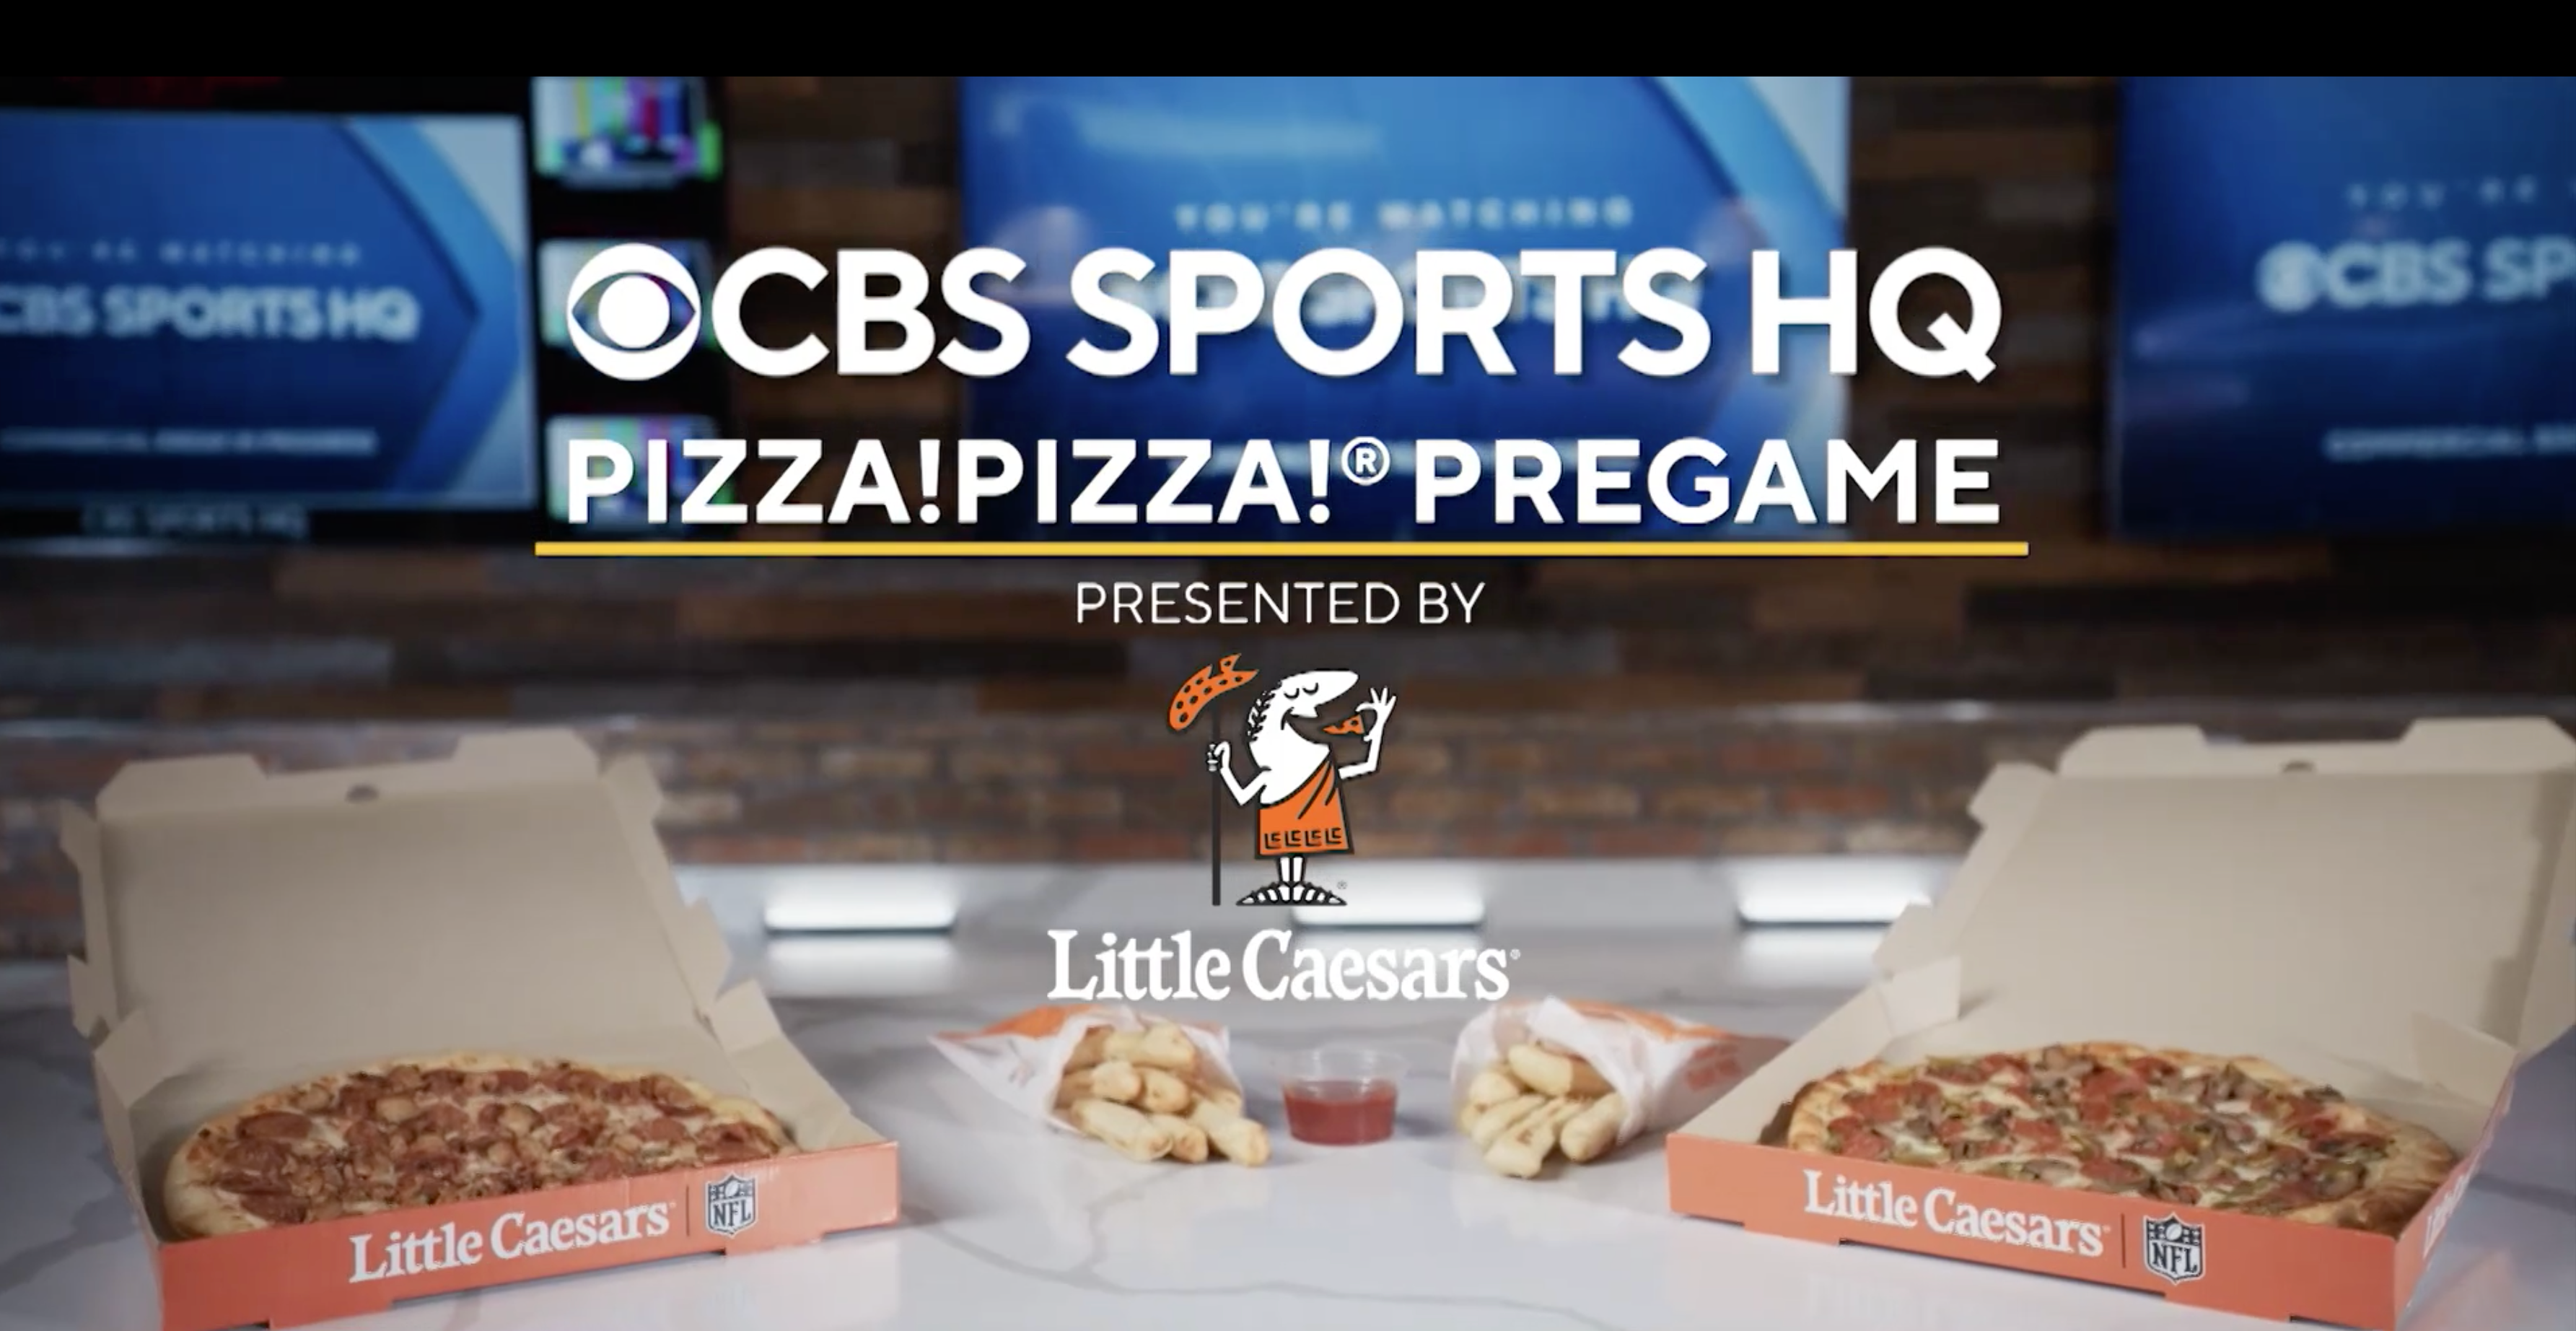 FFT Presented By Little Caesars 